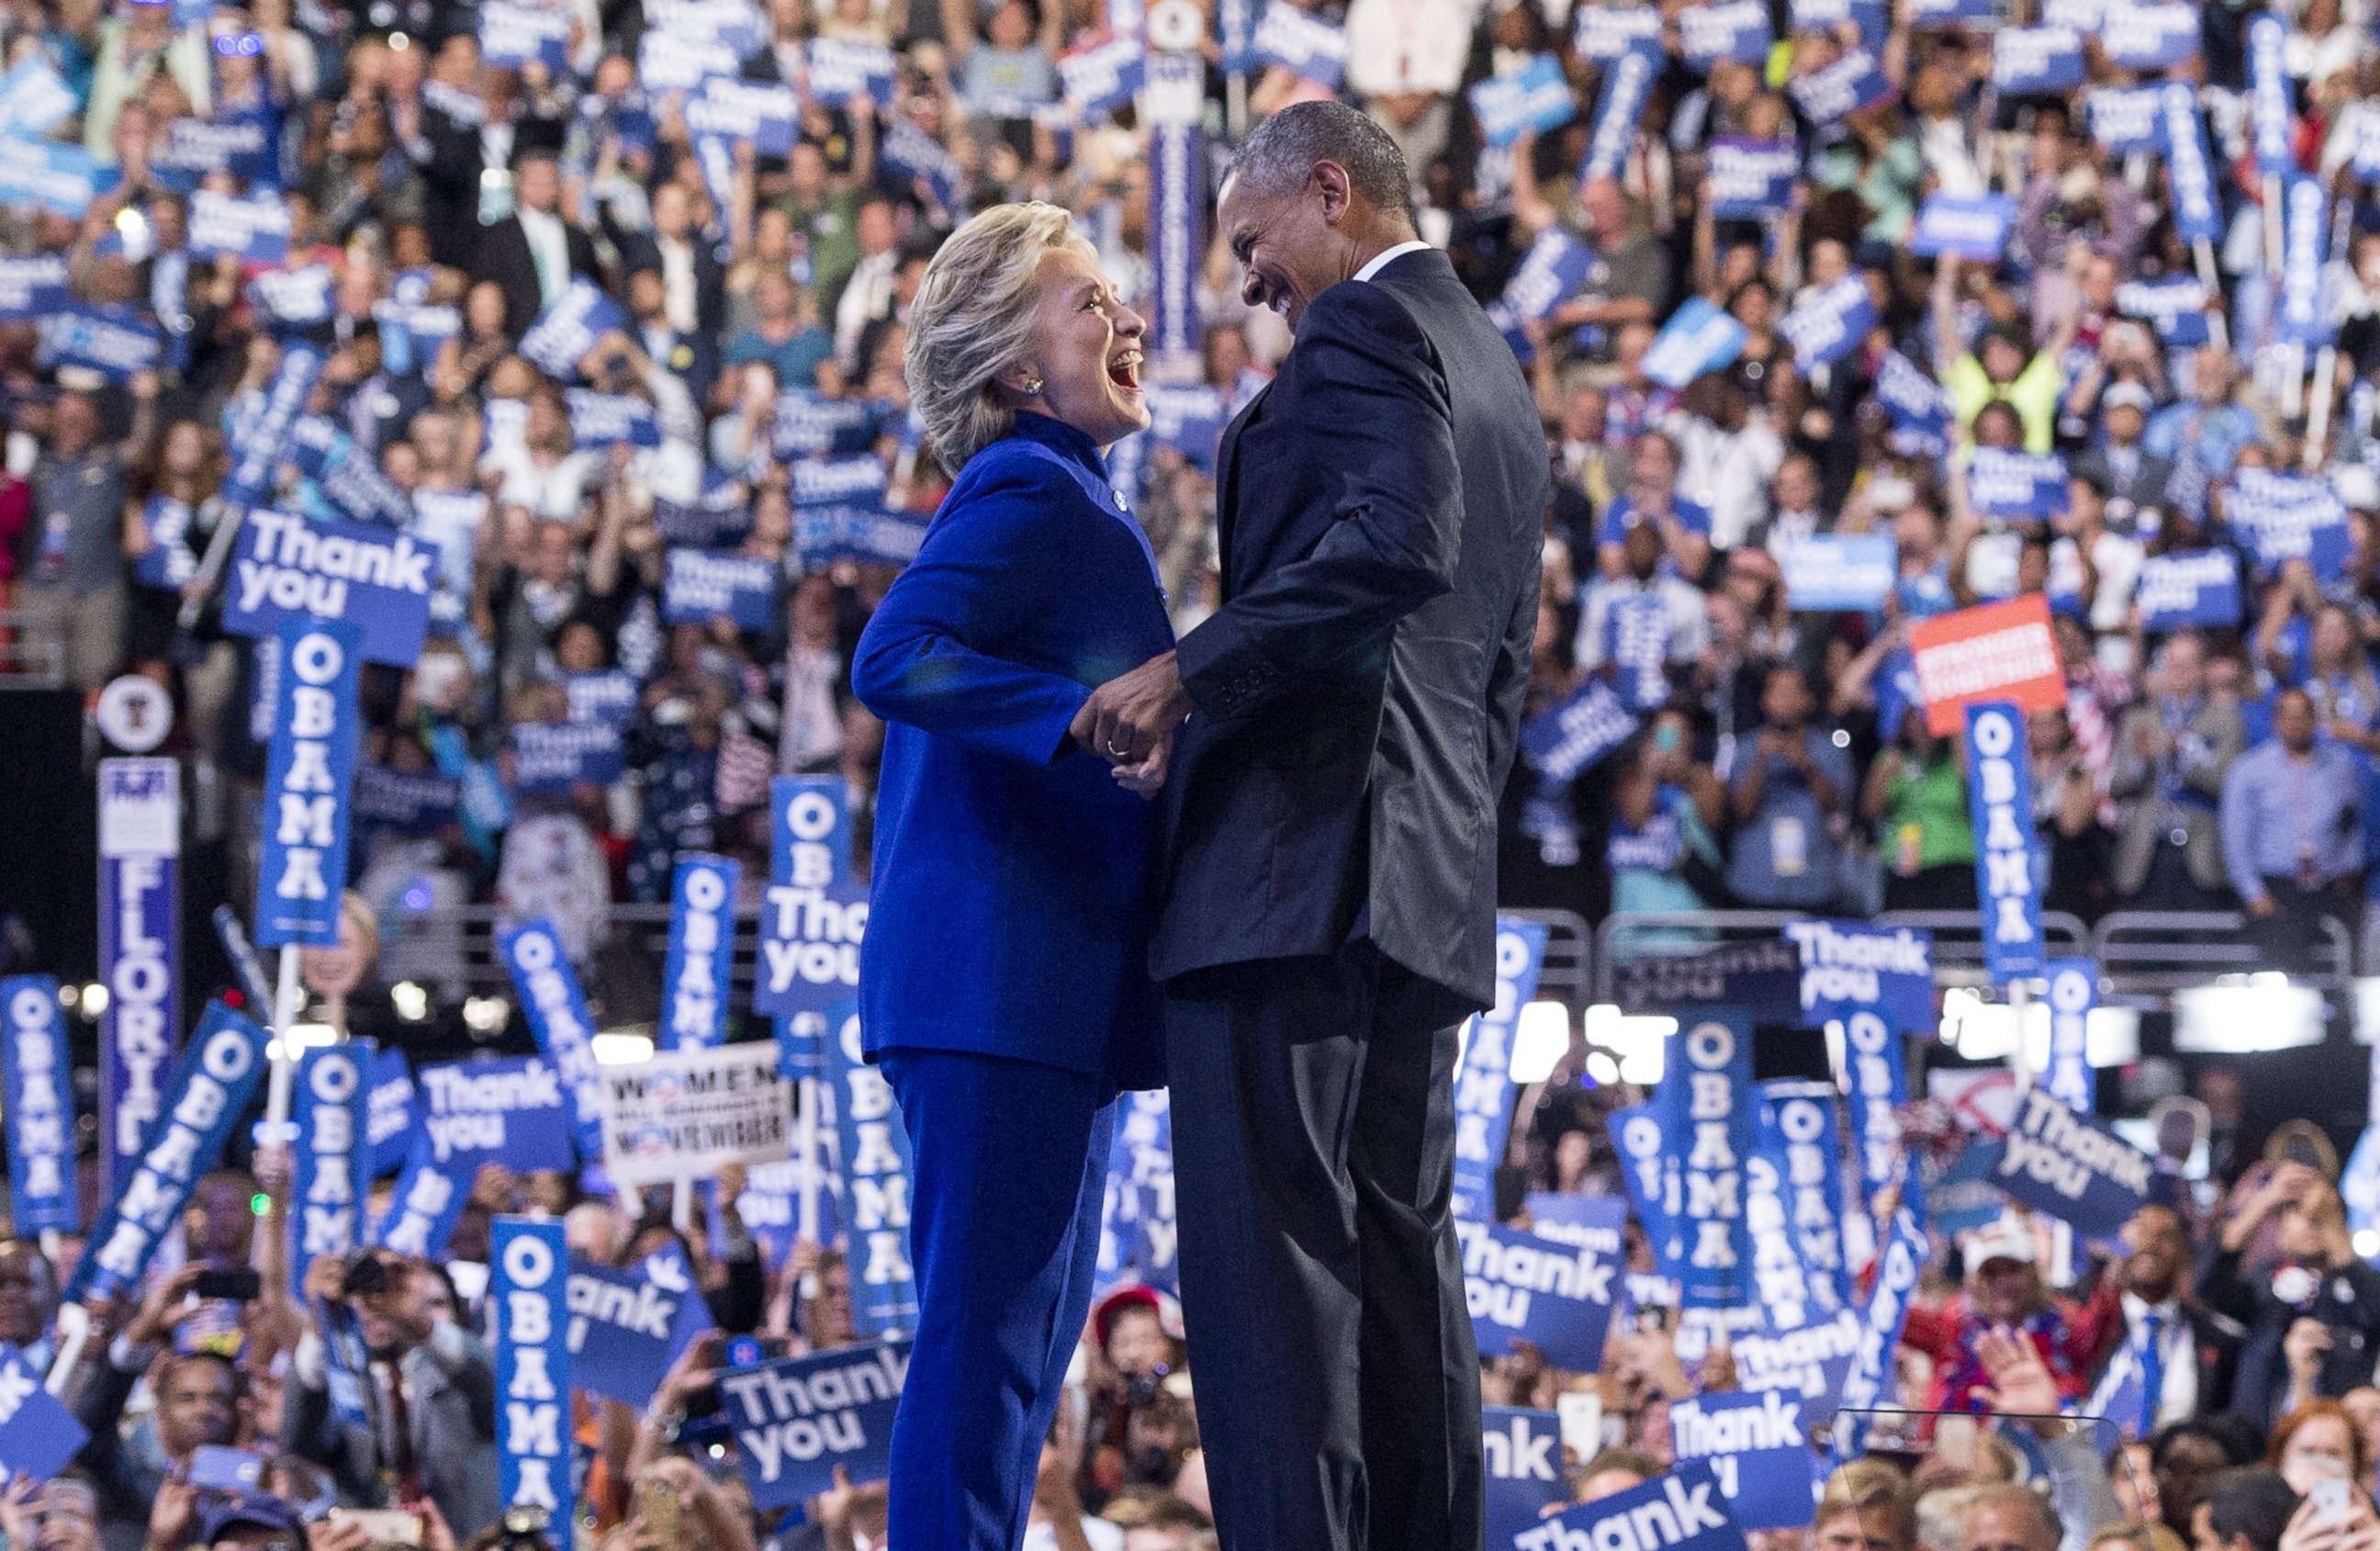 PHOTO: President Barack Obama is joined by US Democratic presidential candidate Hillary Clinton after his address to the Democratic National Convention at the Wells Fargo Center in Philadelphia, July 27, 2016.